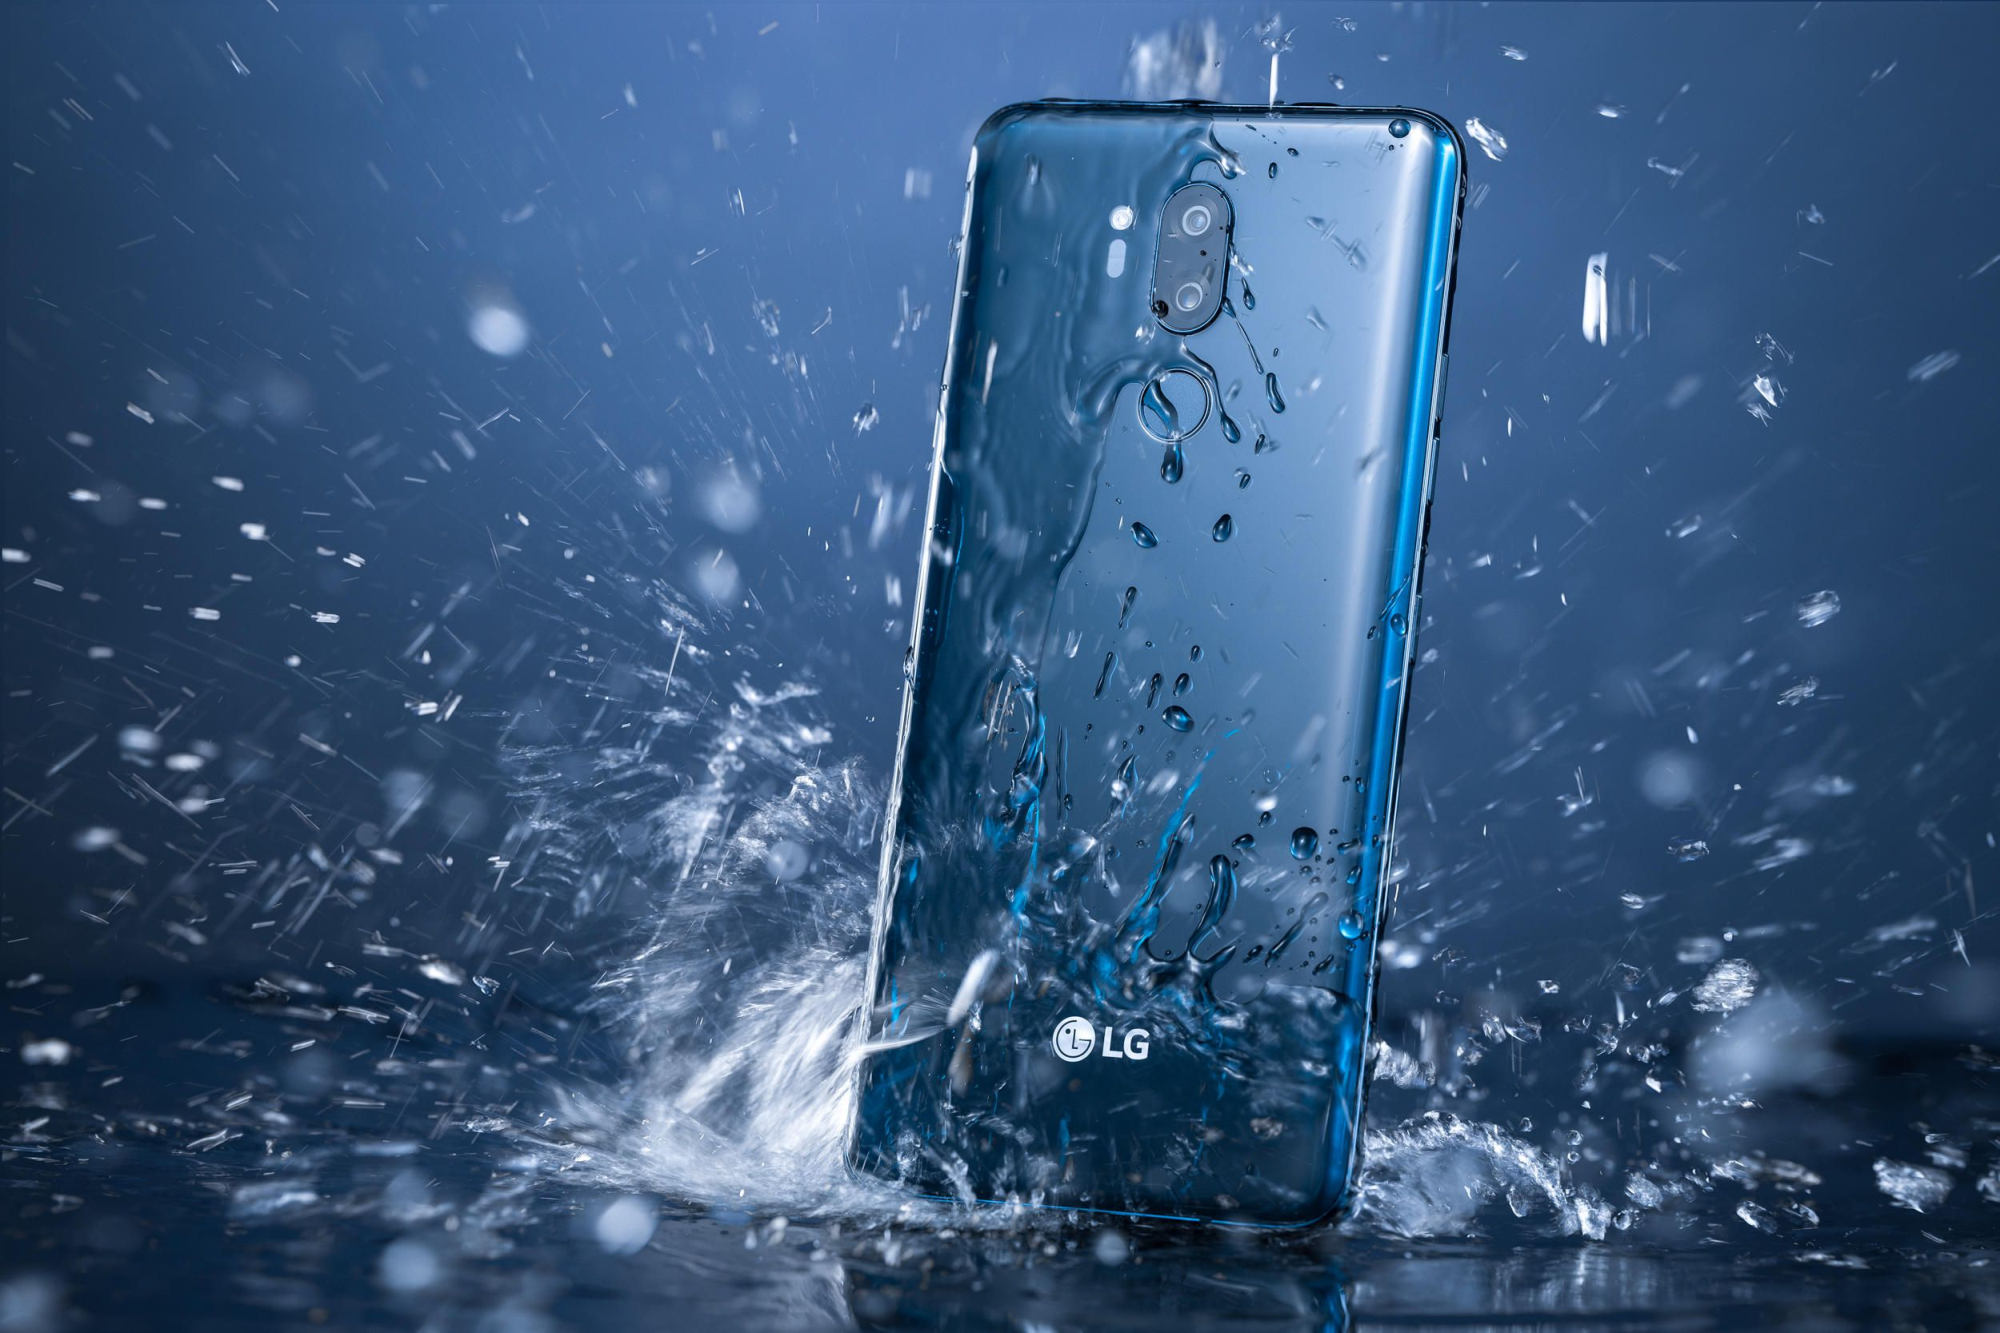 This LG G7 deal makes it a better buy than OnePlus 6T, Zenfone 5Z, and Honor 10 water